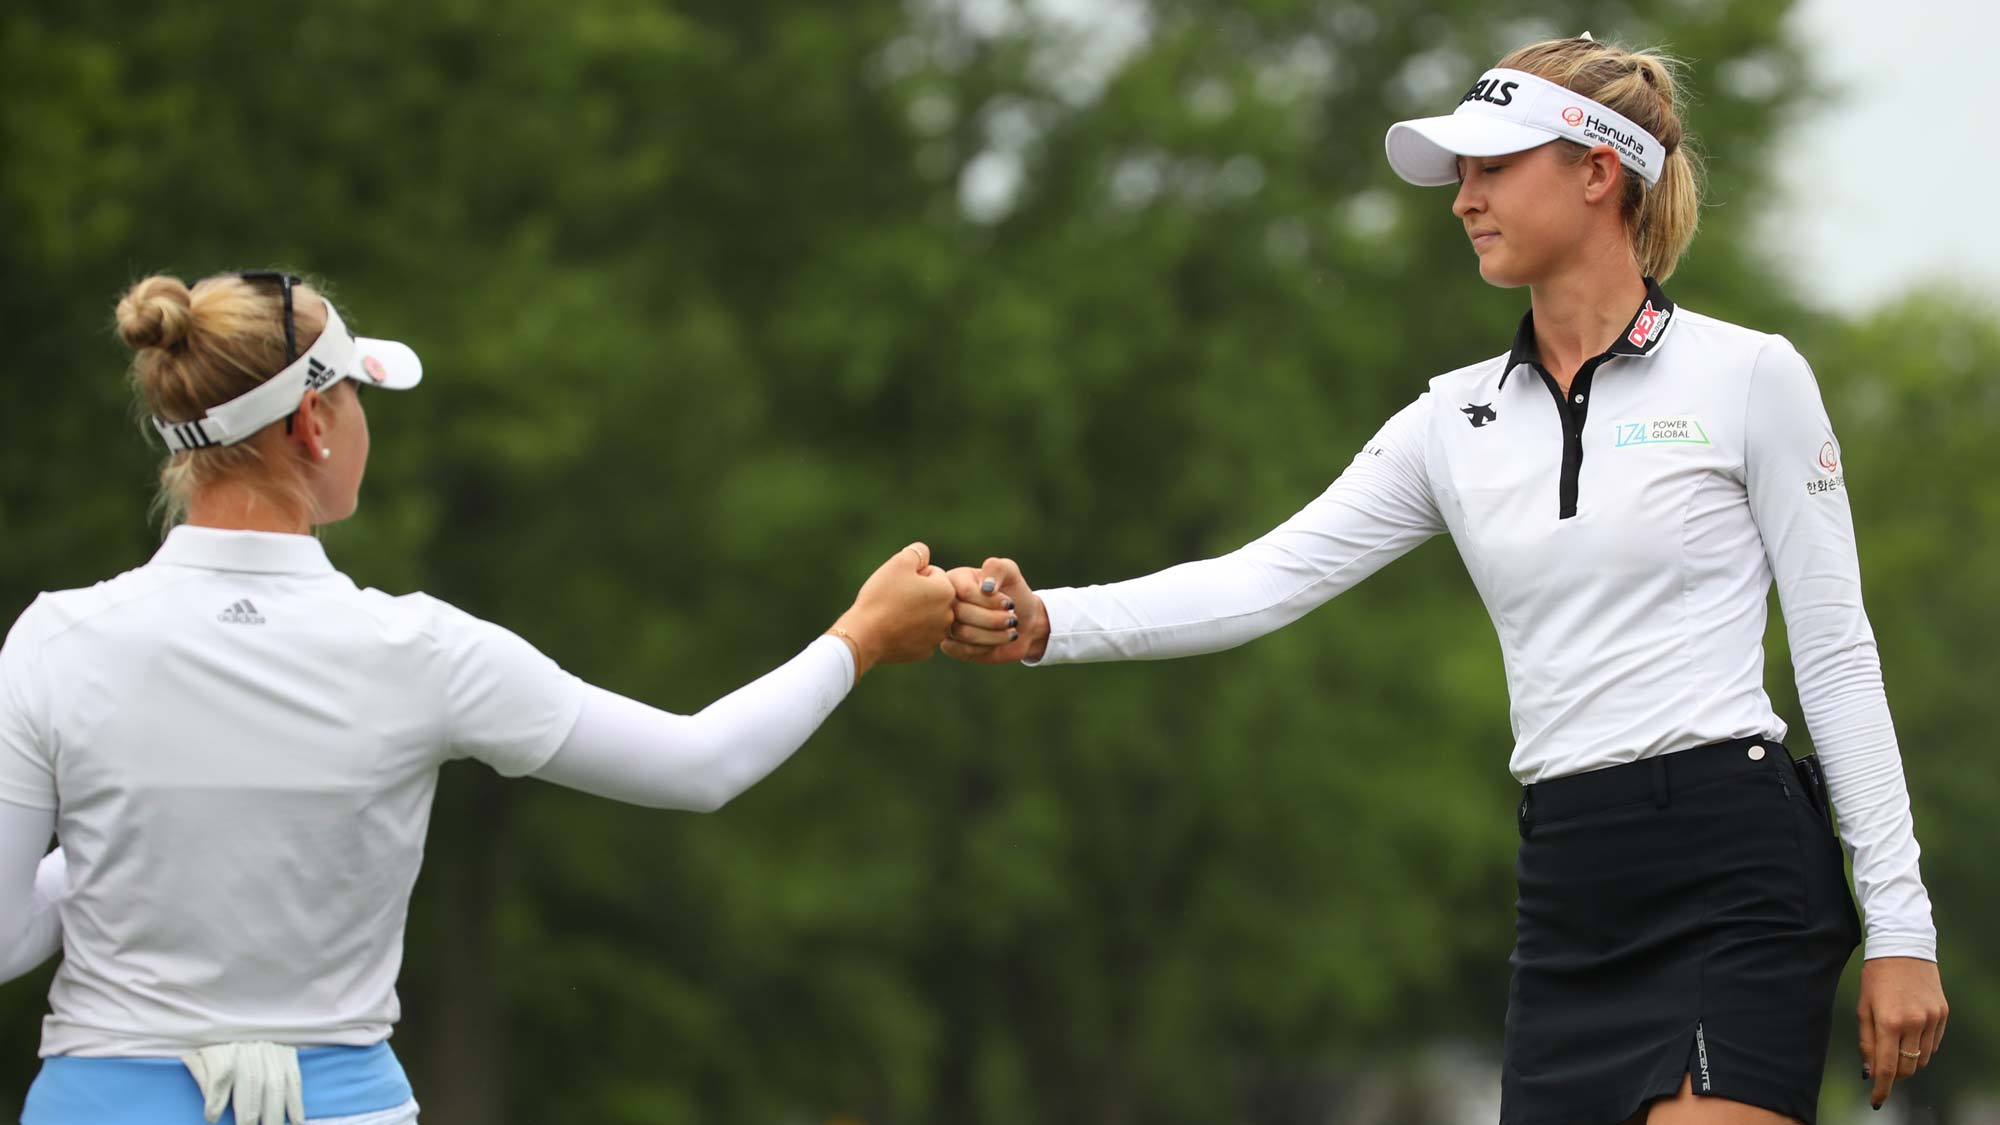 Teammates Jessica Korda (L) and Nelly Korda celebrate on the first green during round two of the Dow Great Lakes Bay Invitational 